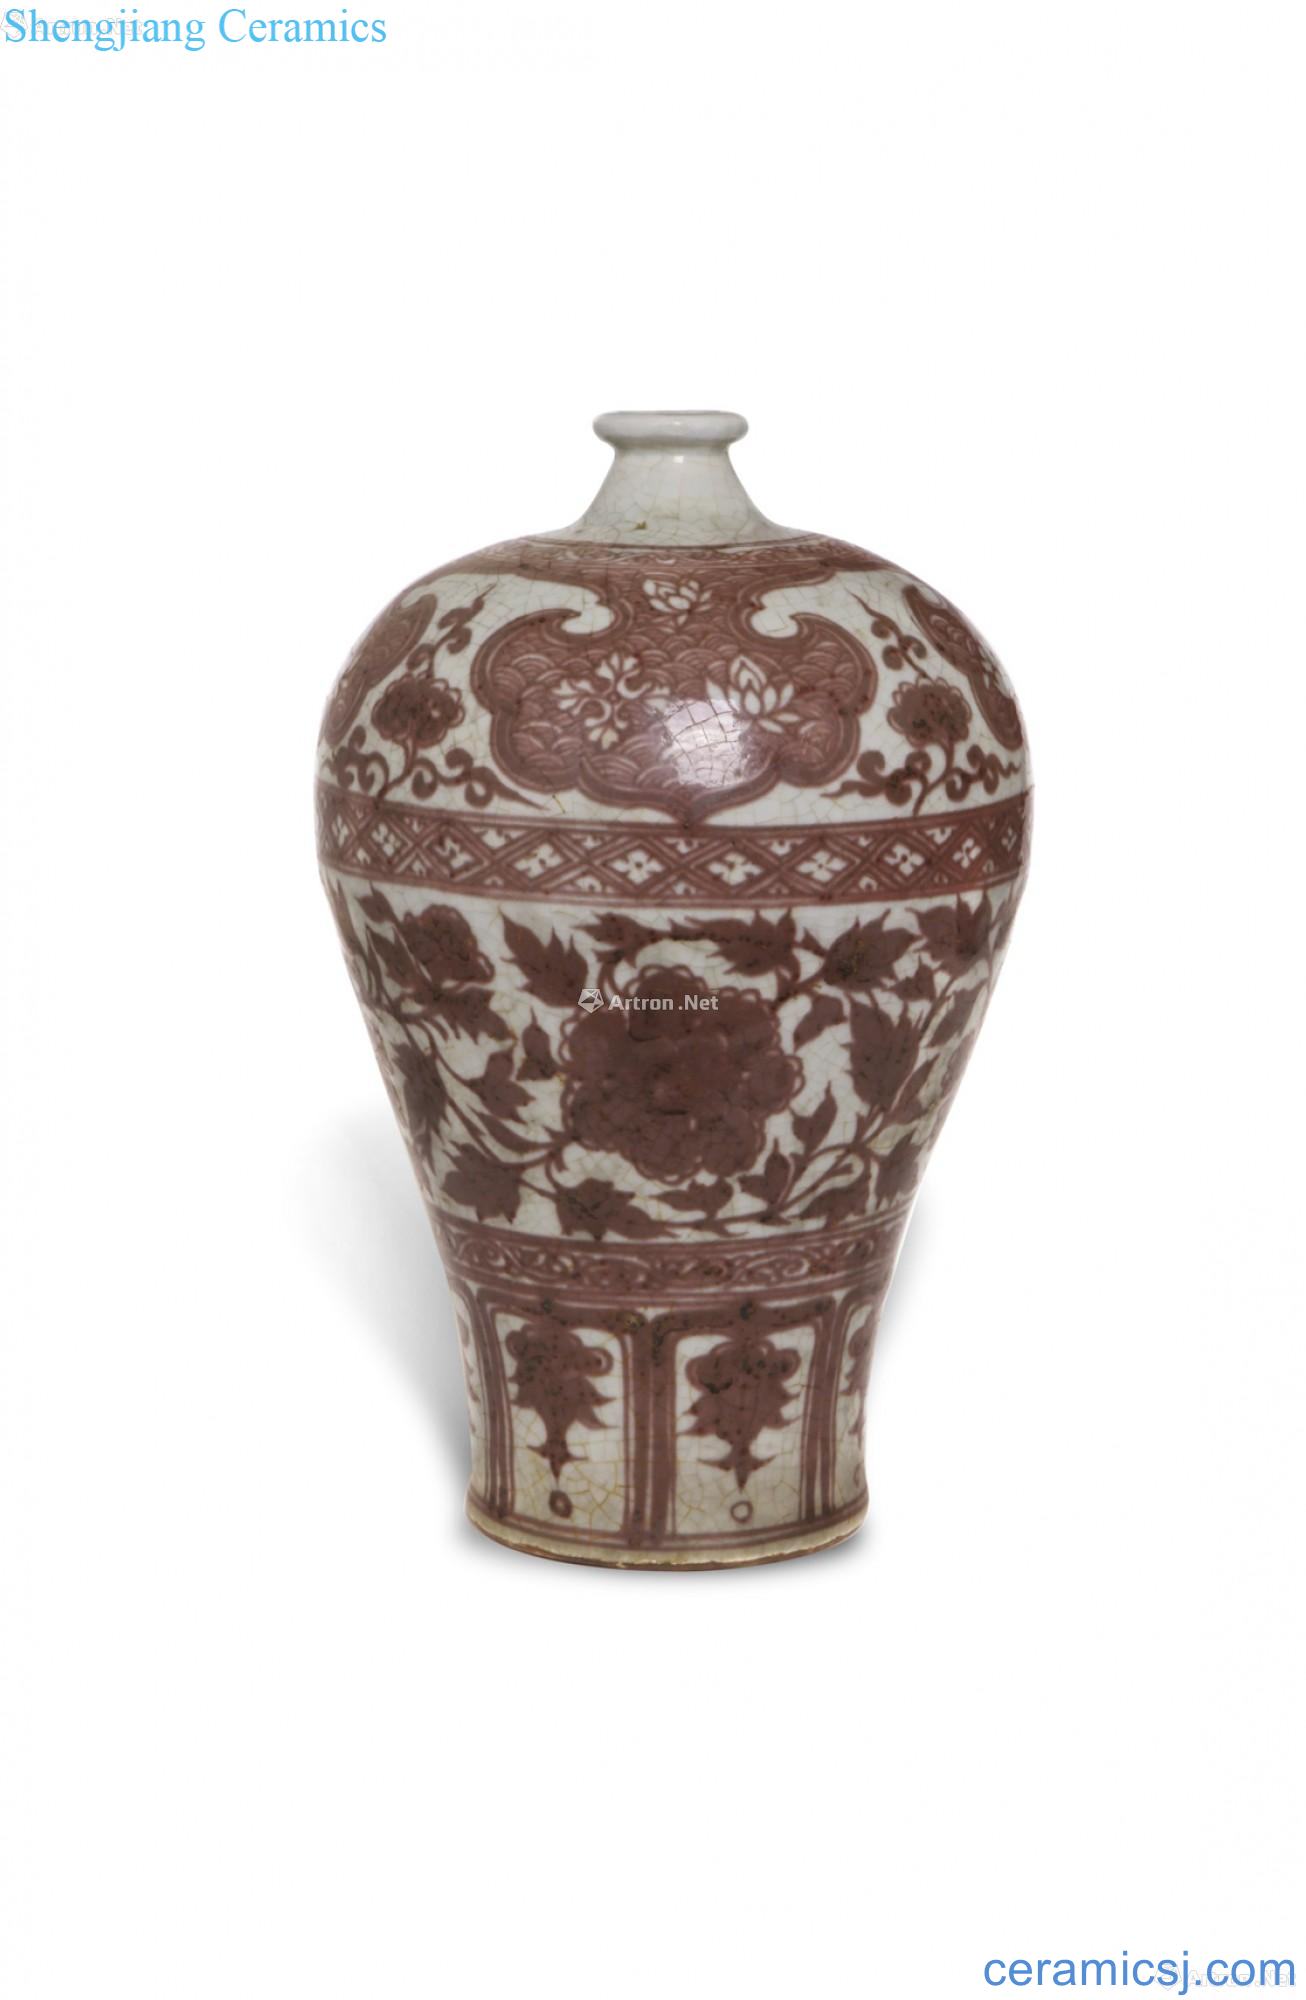 Traditional Chinese peony grains youligong hong mei bottles